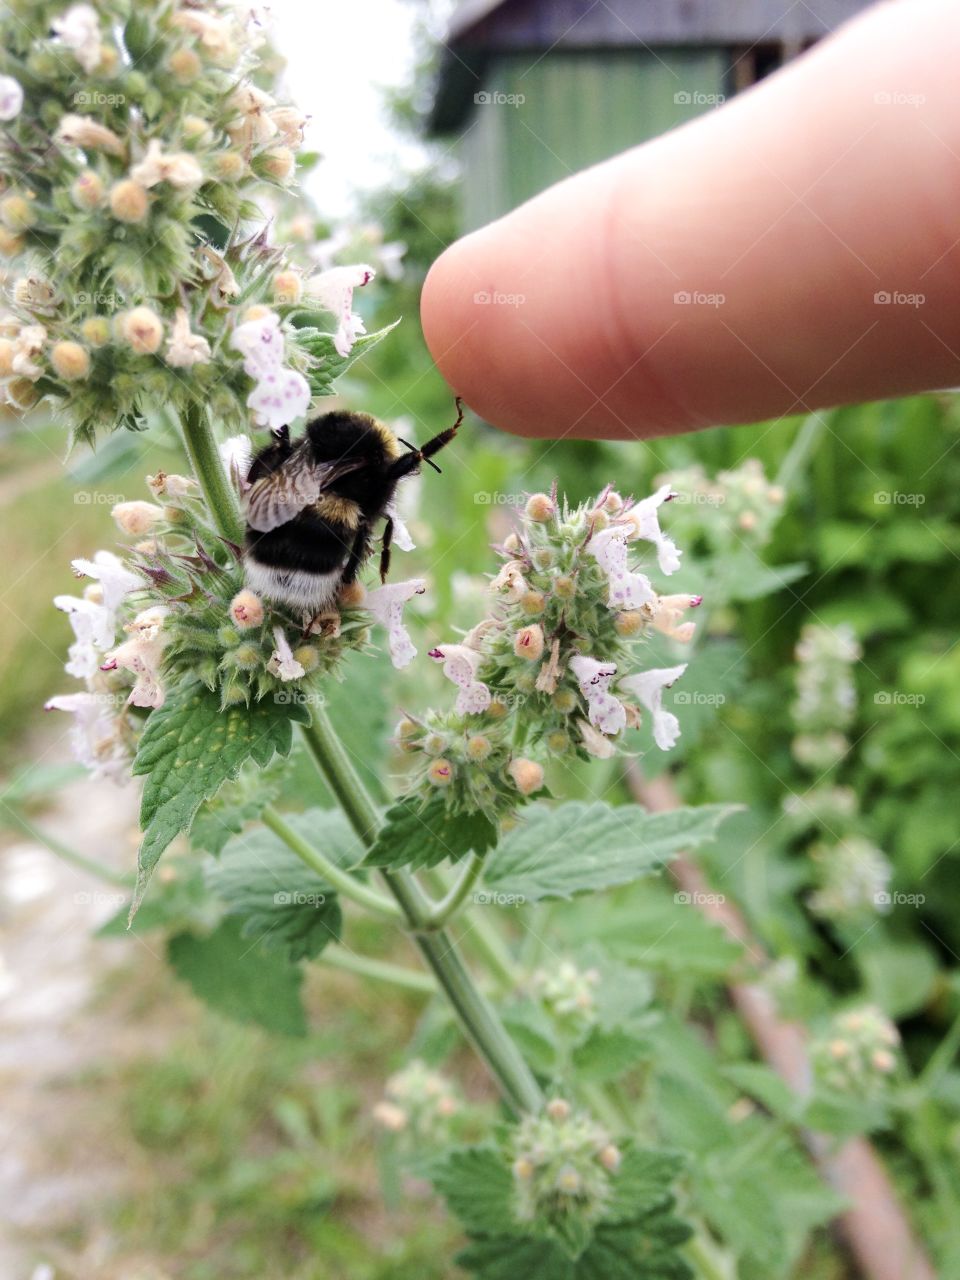 A very friendly bee gives high five!